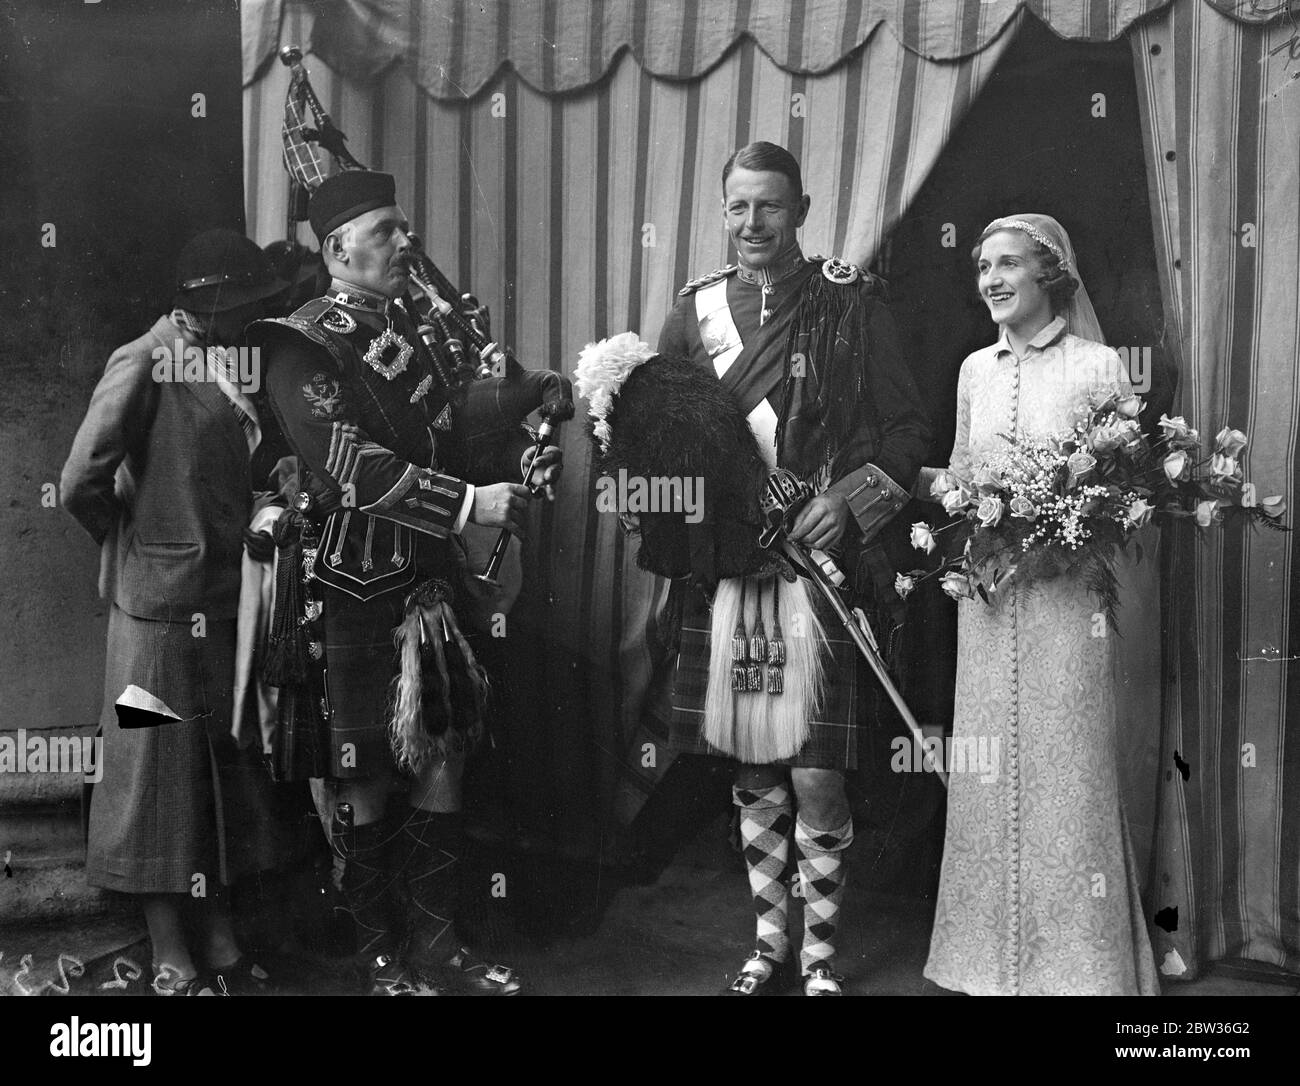 Seaforth Highlander at London wedding . Captain C P , Ronald Johnston of the Seaforth Highlanders was married to Miss Hermione Gray , daughter of Lieutenant Colonel Clive Gray , at St George ' s Church , Hanover Square , London . The bridegroom is the son of Lieutenant Colonel W J Johnston of Lesmurdie , Elgin , who wrote the wedding march played at the ceremony . Photo shows , the bride and groom being piped from the church . 15 November 1933 Stock Photo